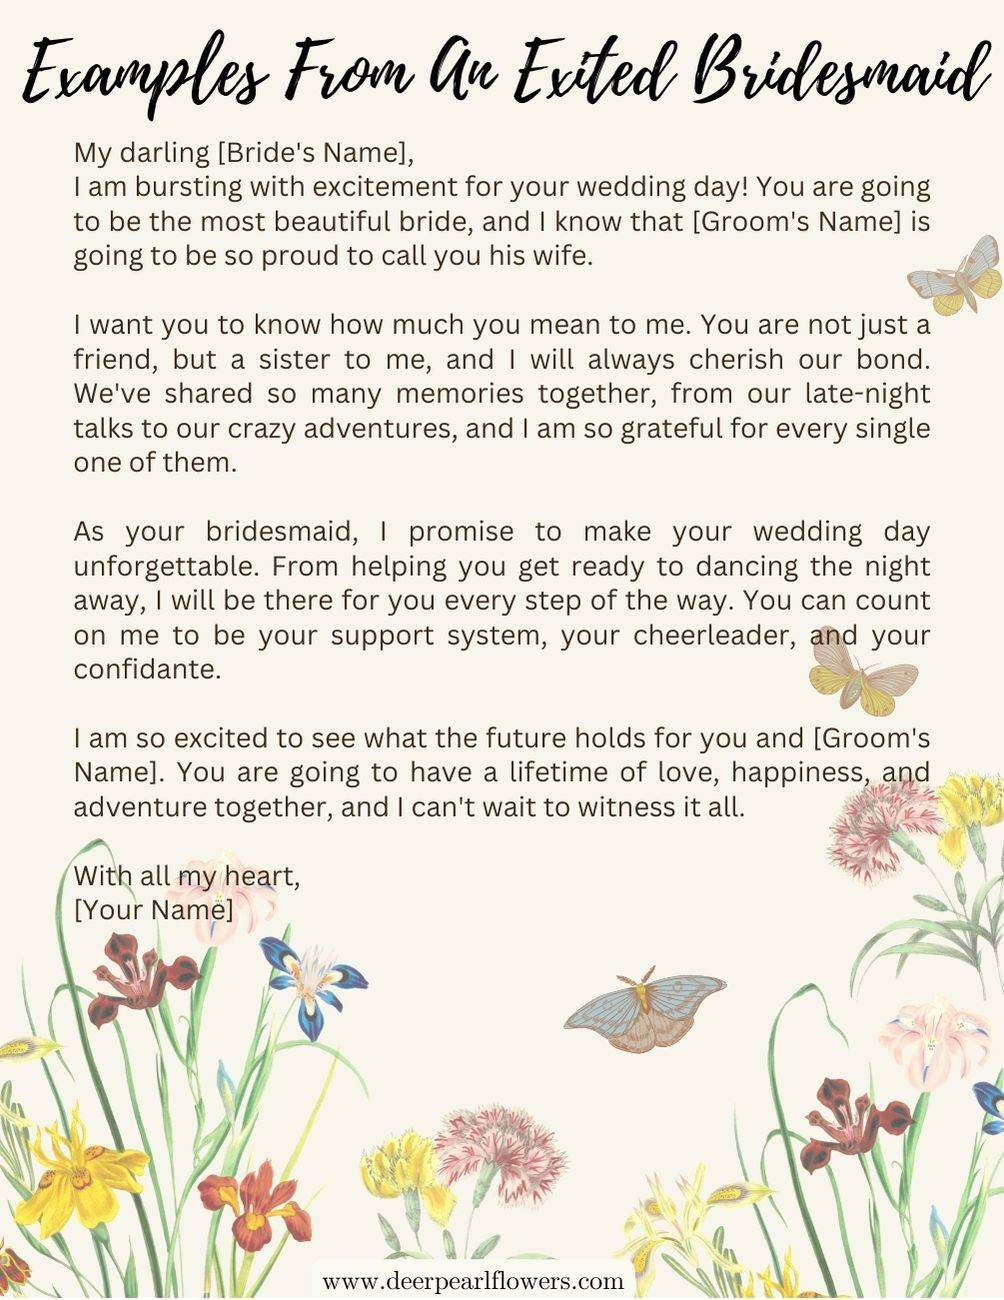 Letter Example From An Exited Bridesmaid to Bride